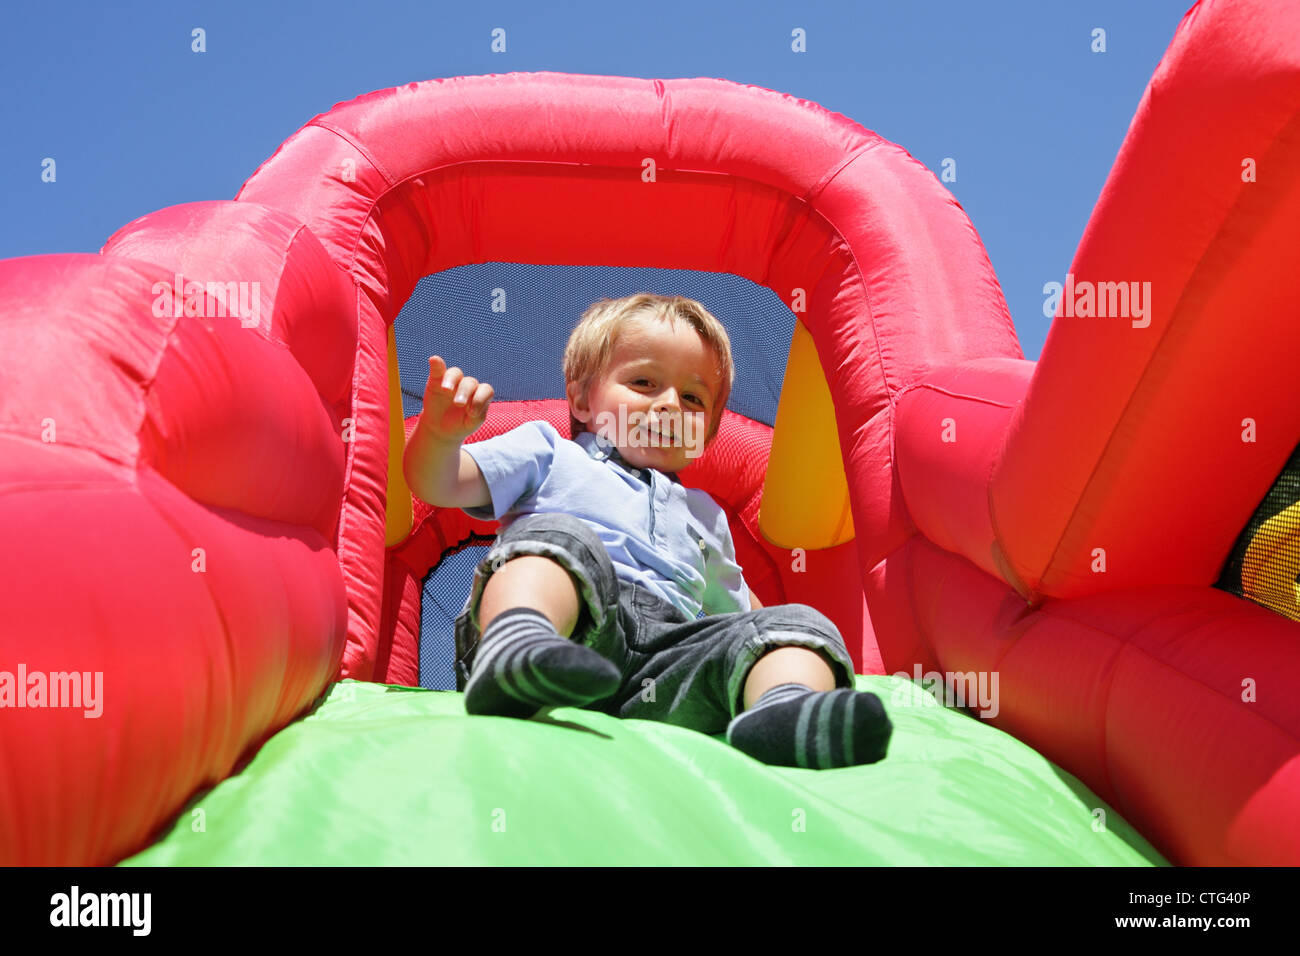 Child on inflatable bouncy castle slide Stock Photo